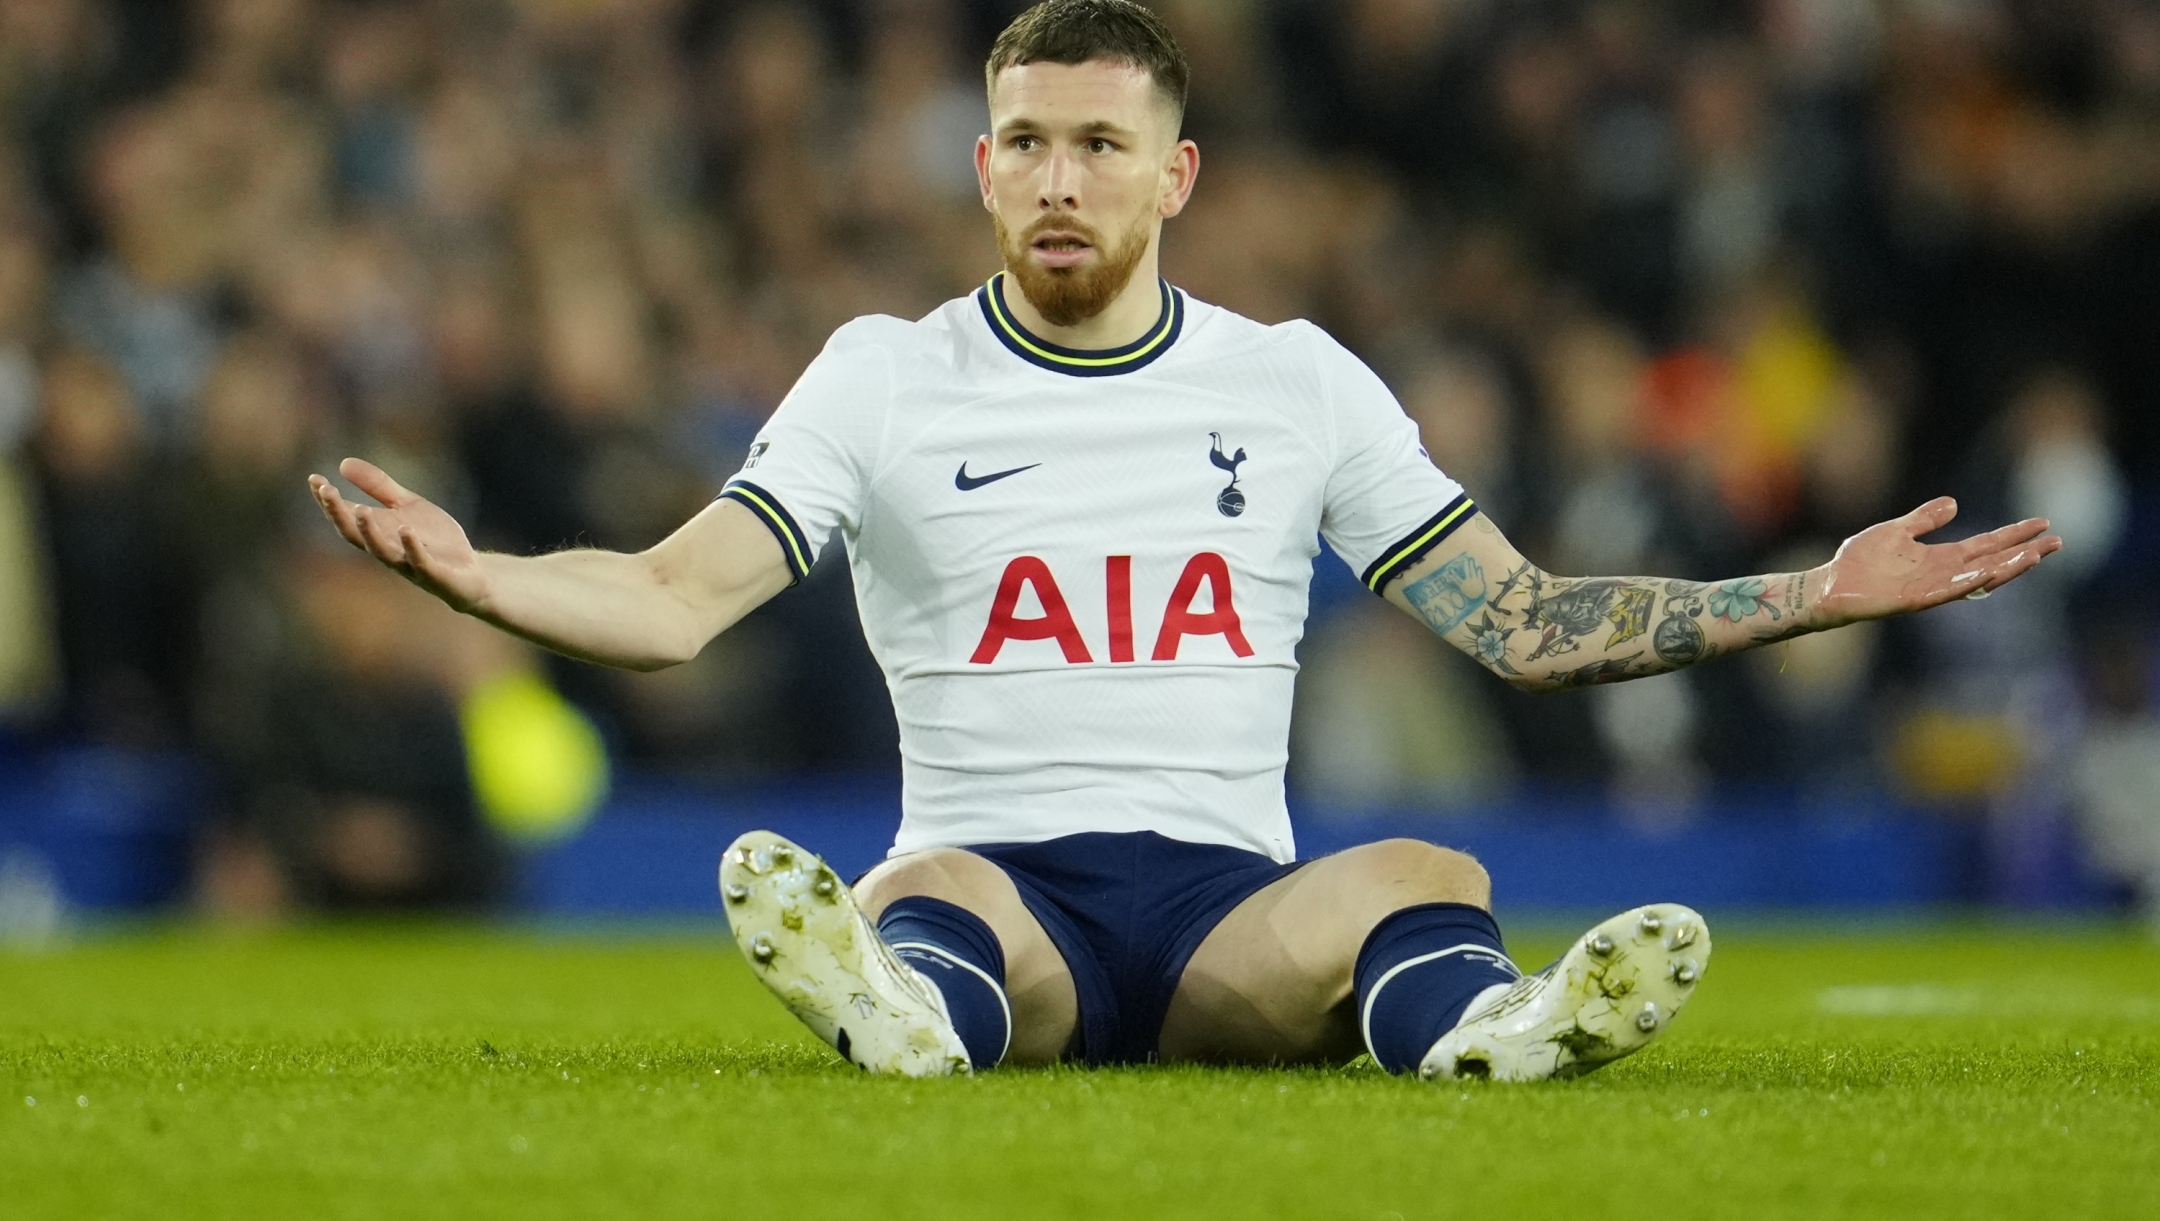 Tottenham's Pierre-Emile Hojbjerg reacts during the English Premier League soccer match between Everton and Tottenham Hotspur at the Goodison Park stadium in Liverpool, England, Monday, April 3, 2023. (AP Photo/Jon Super)